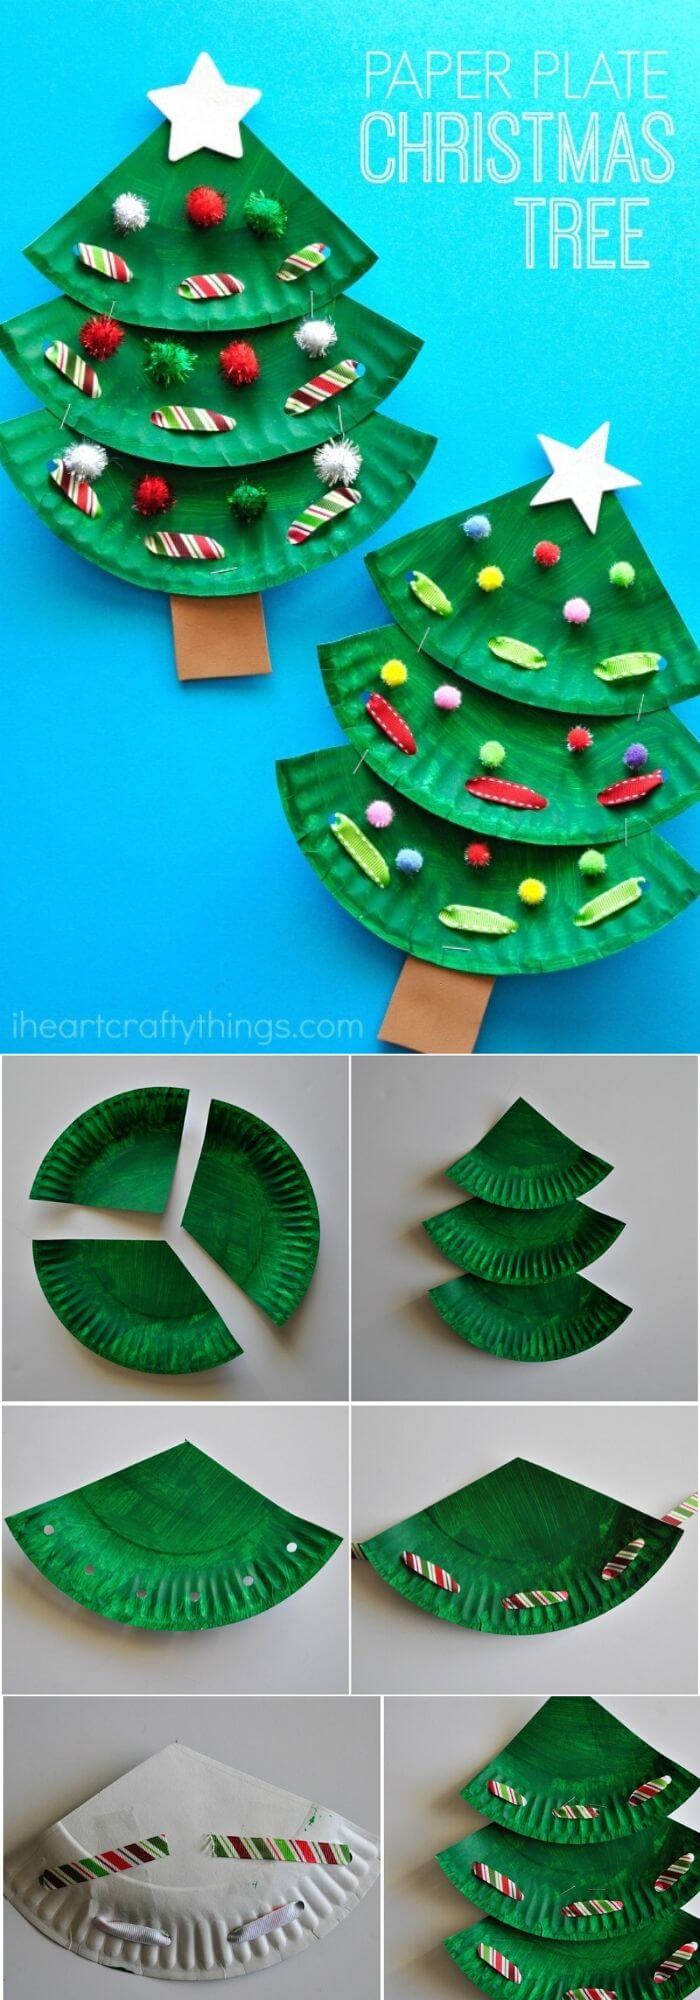 Paper Plate Christmas Tree Craft | Easy, Inexpensive, and Creative Christmas Crafts for Kids